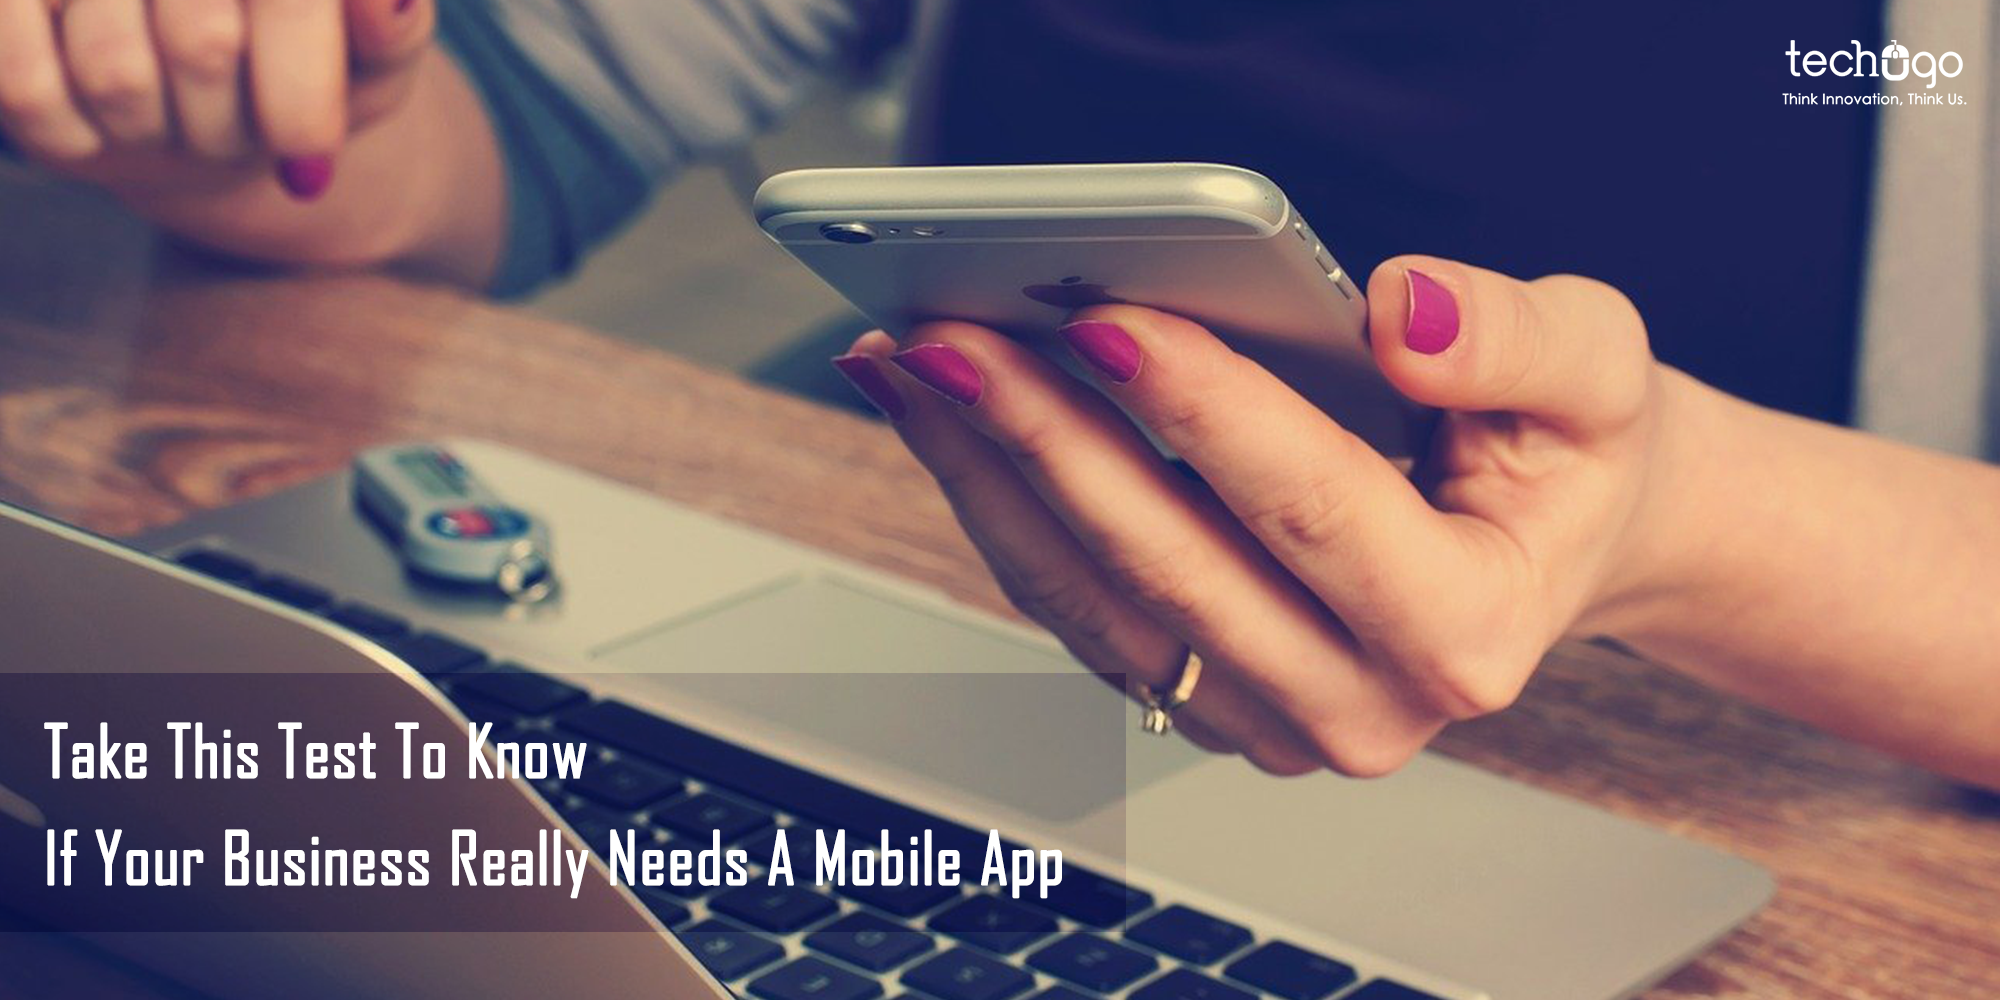 Your Business Really Needs A Mobile App